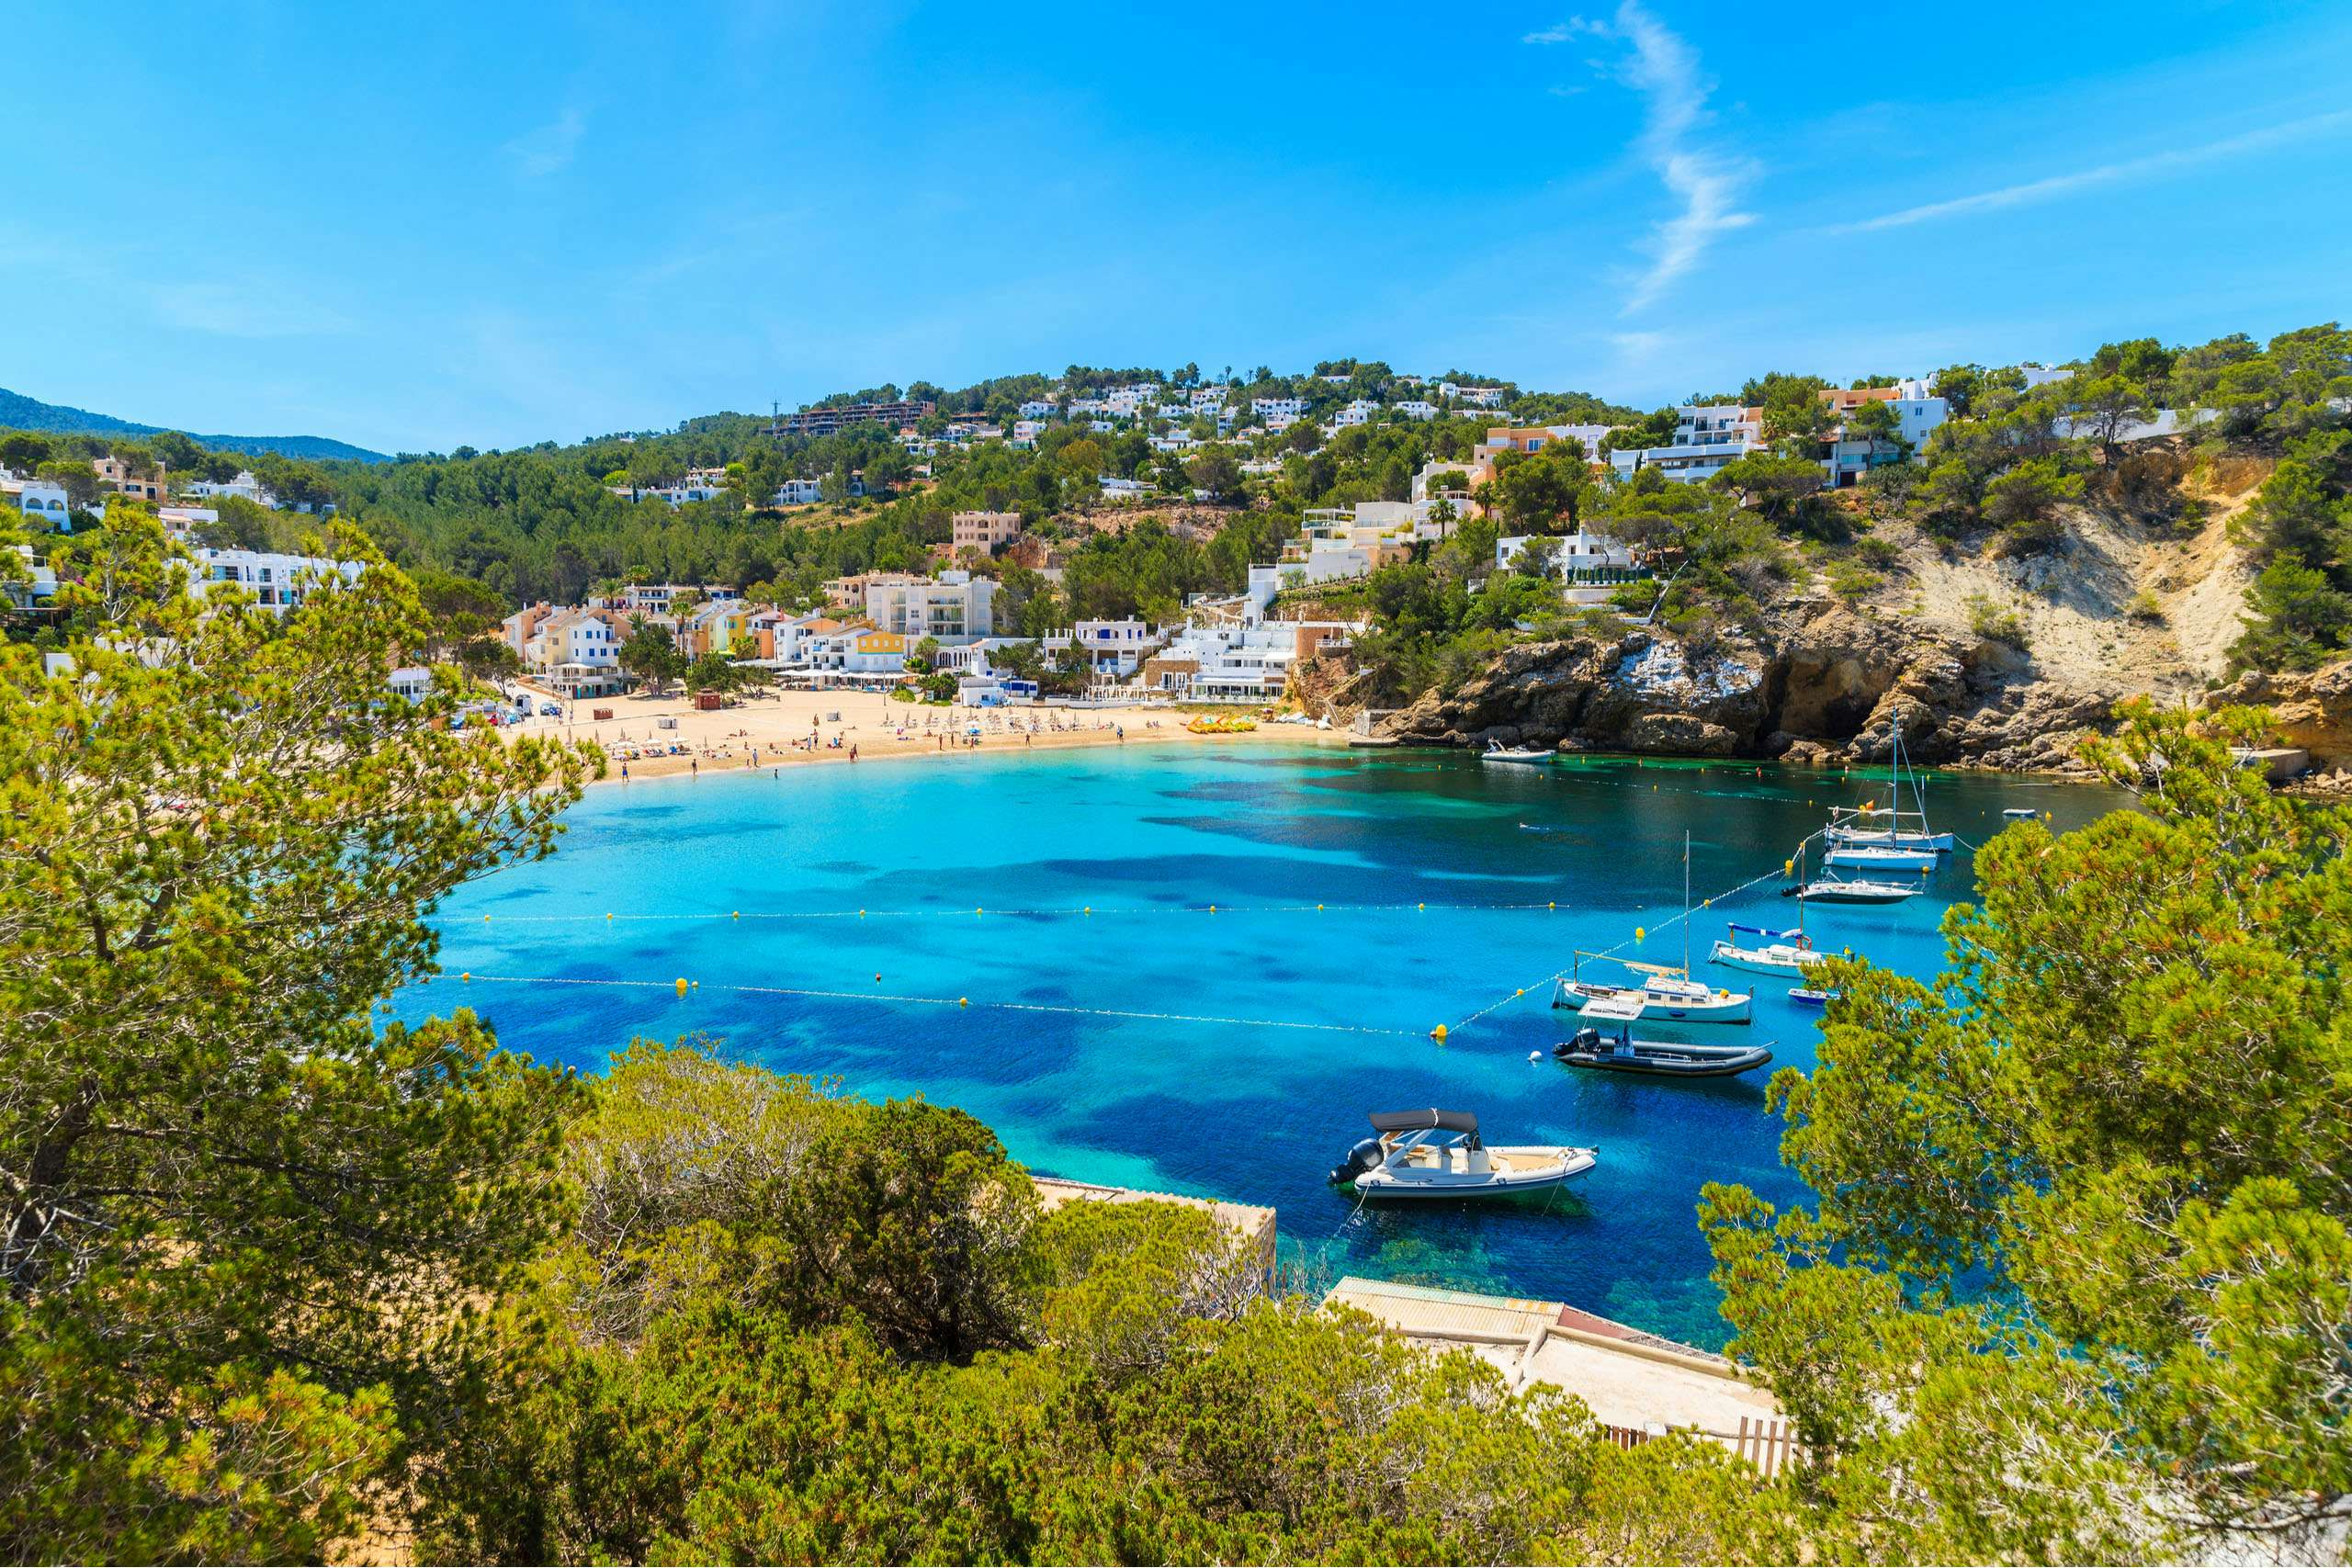 Ibiza Crewed Yacht Charter - Turquoise bay in the wild | Yacht Charter Vacations | Superyacht Rentals | N&J